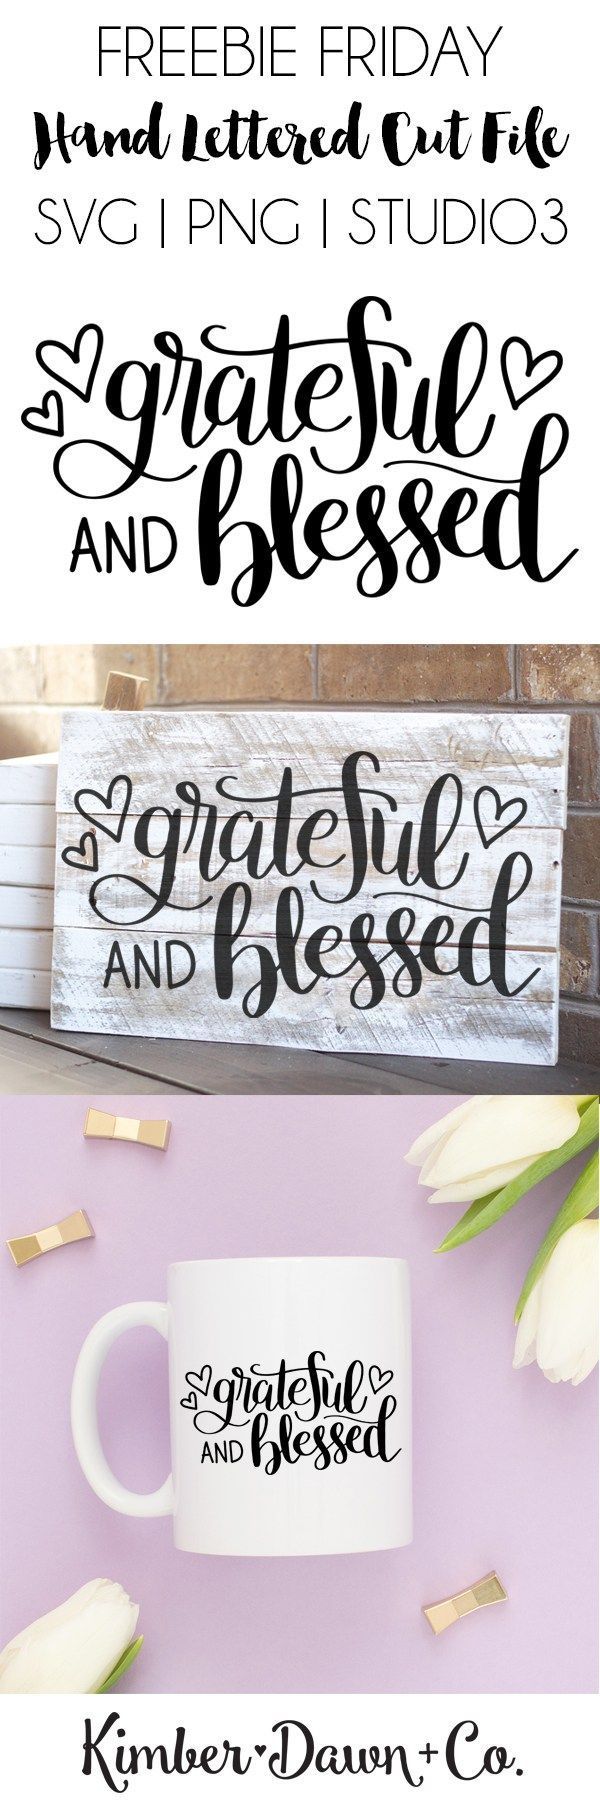 Hand Lettered Grateful and Blessed Free SVG Cut File  Hand Lettered Grateful and Blessed Free SVG Cut File   Who’s ready for